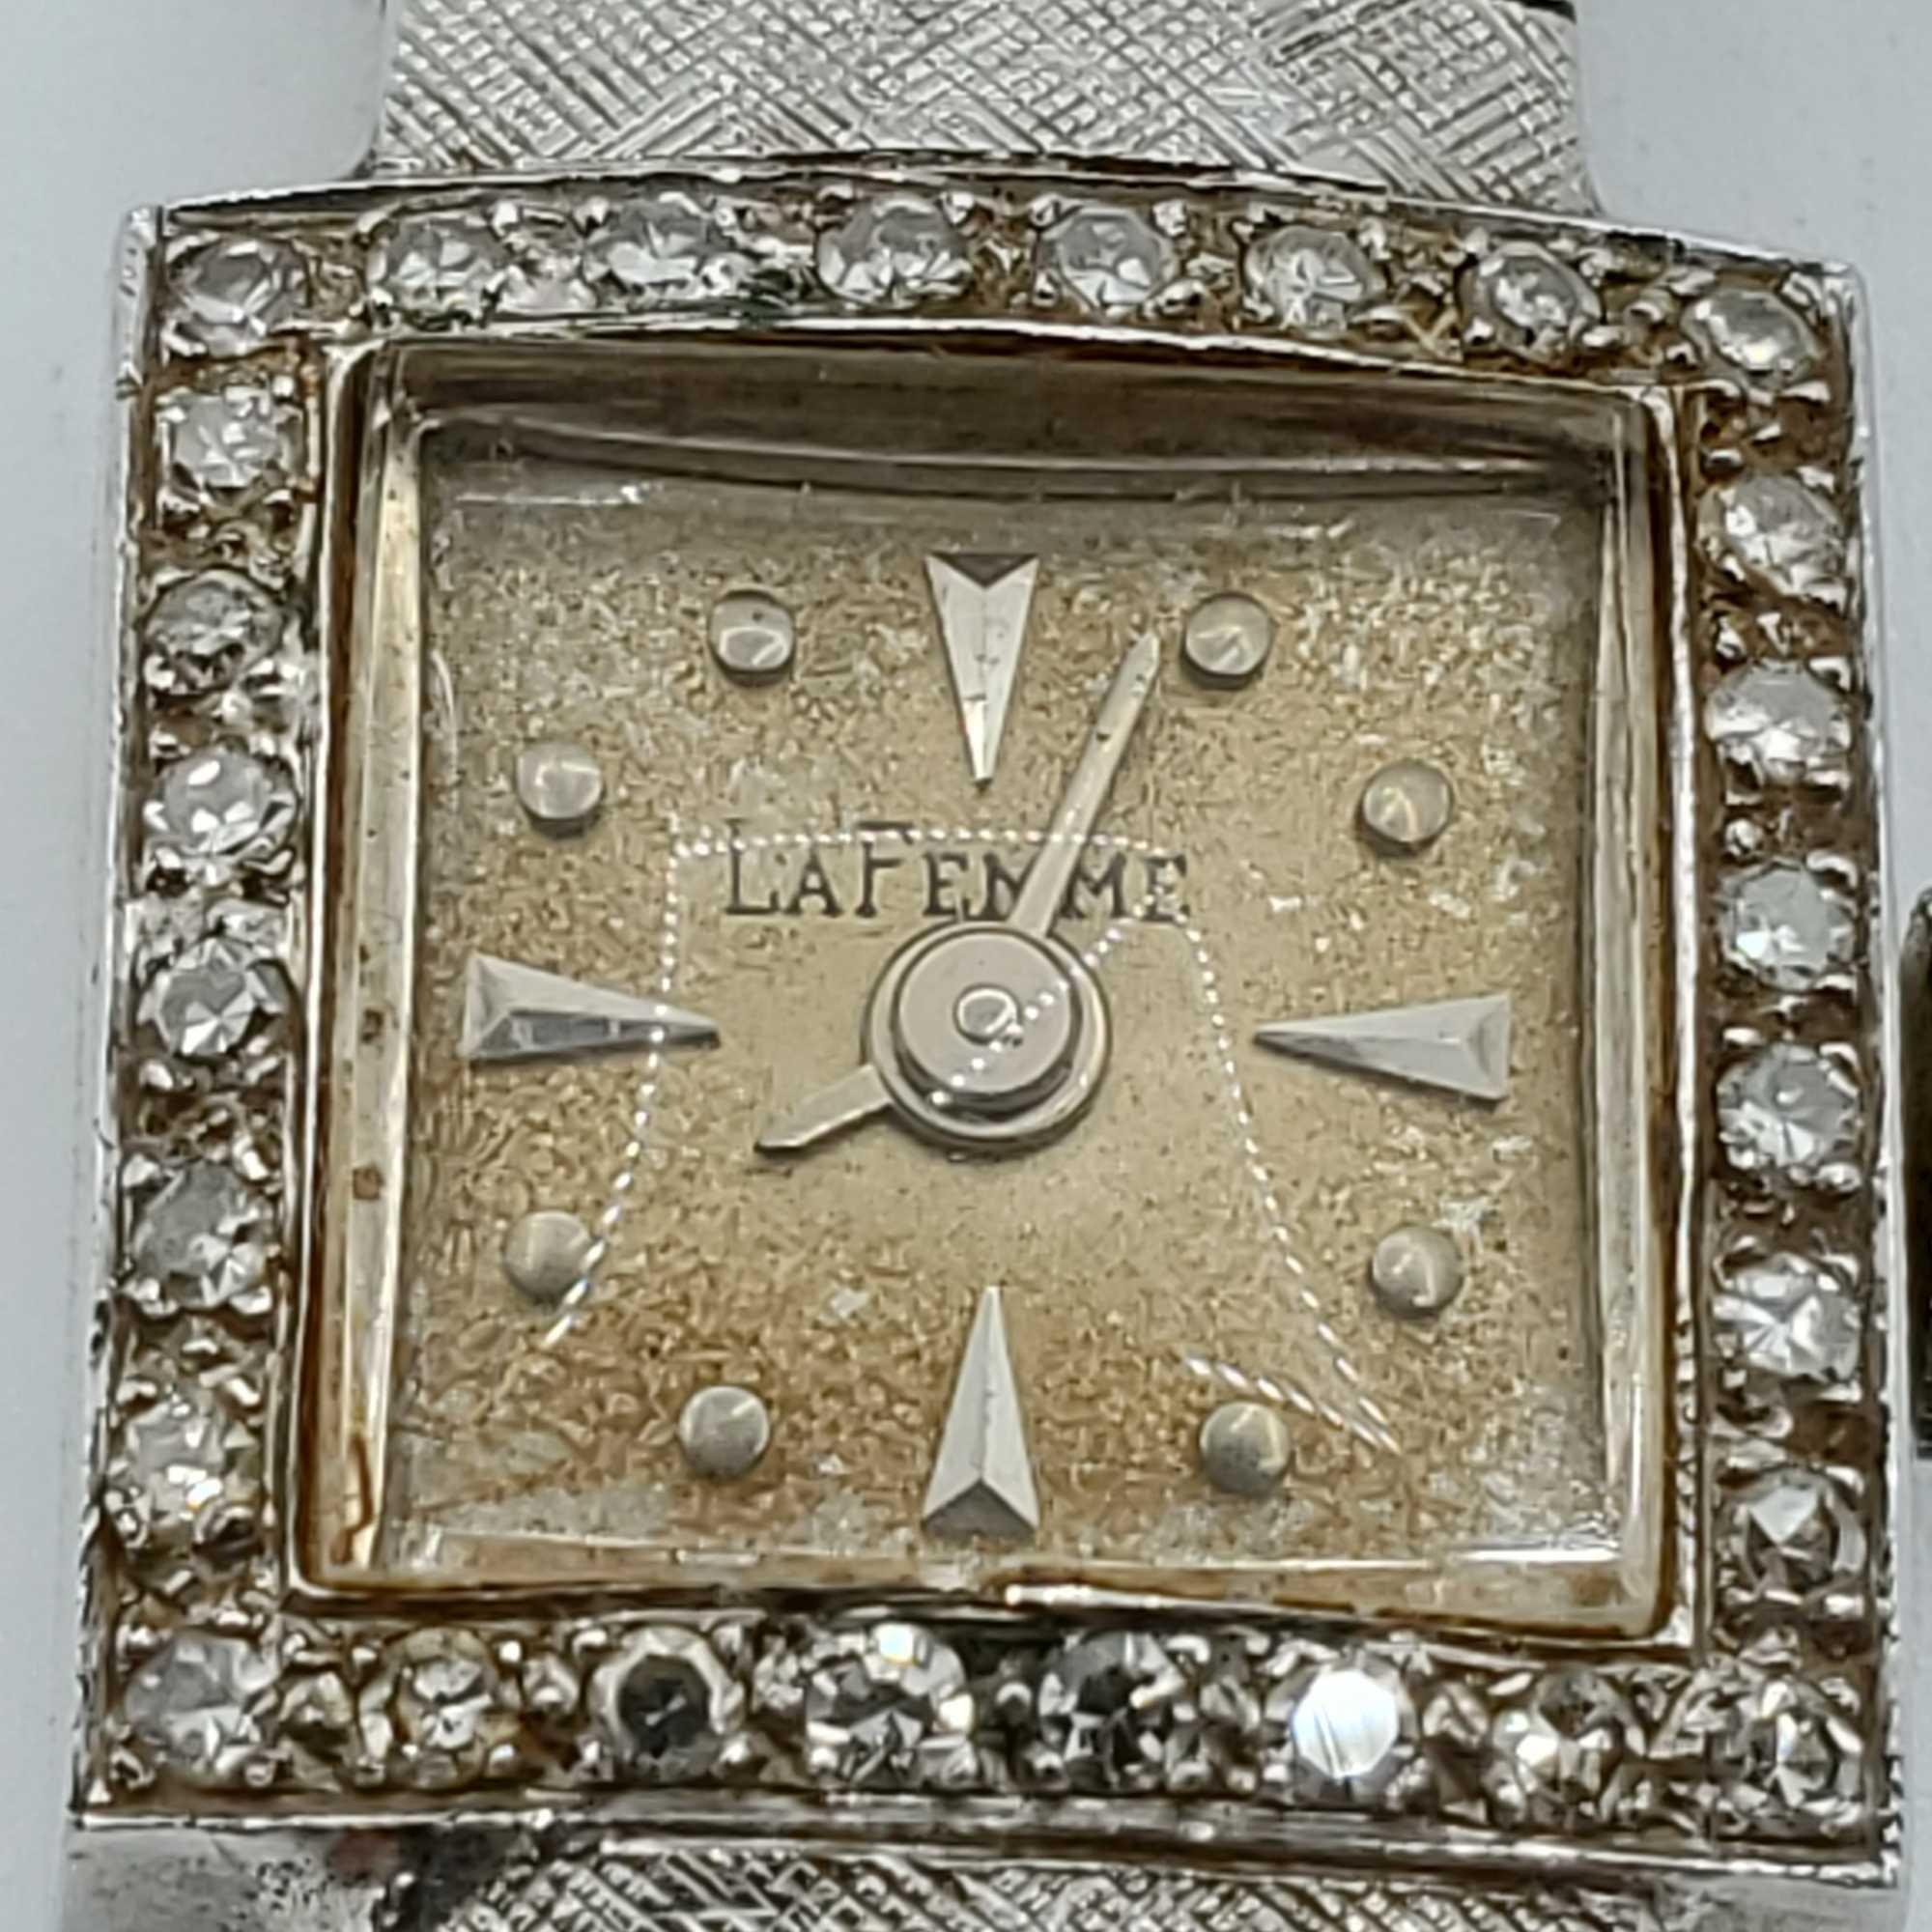 Ladies La Femme 14k White Gold Watch With Square Face Diamond Bezel And 14K covered Mesh Band